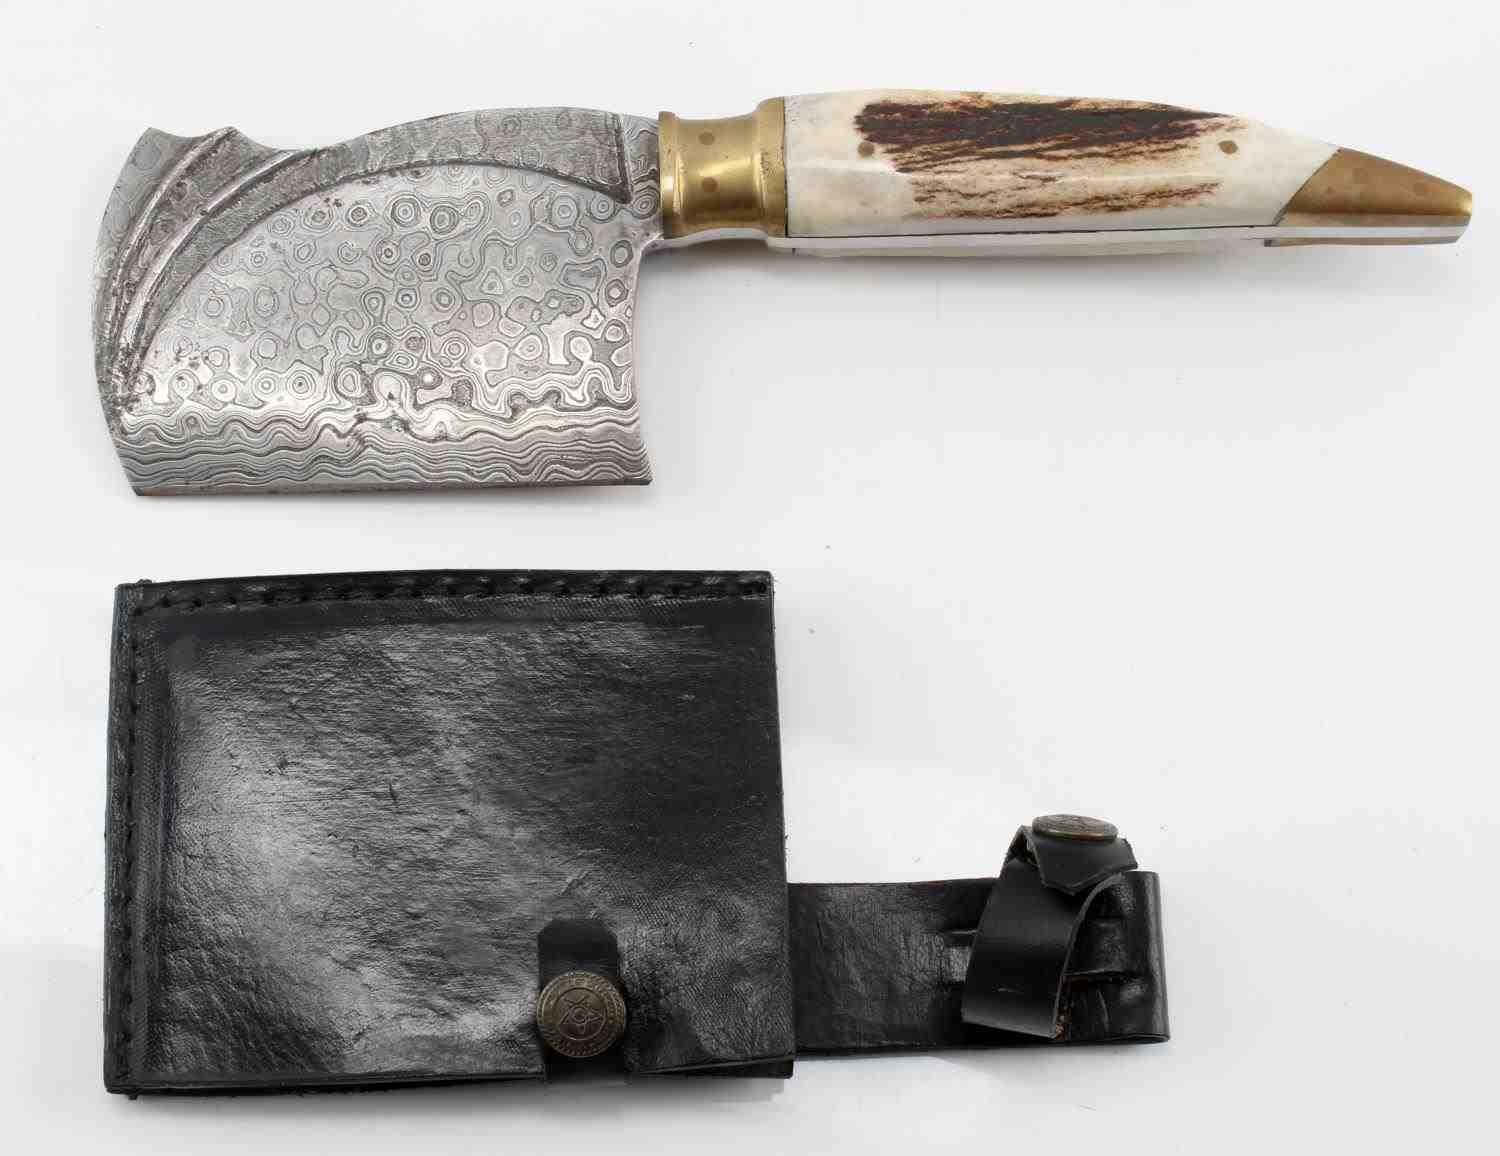 DAMASCUS BLADE STAG GRIP CLEAVER KNIFE